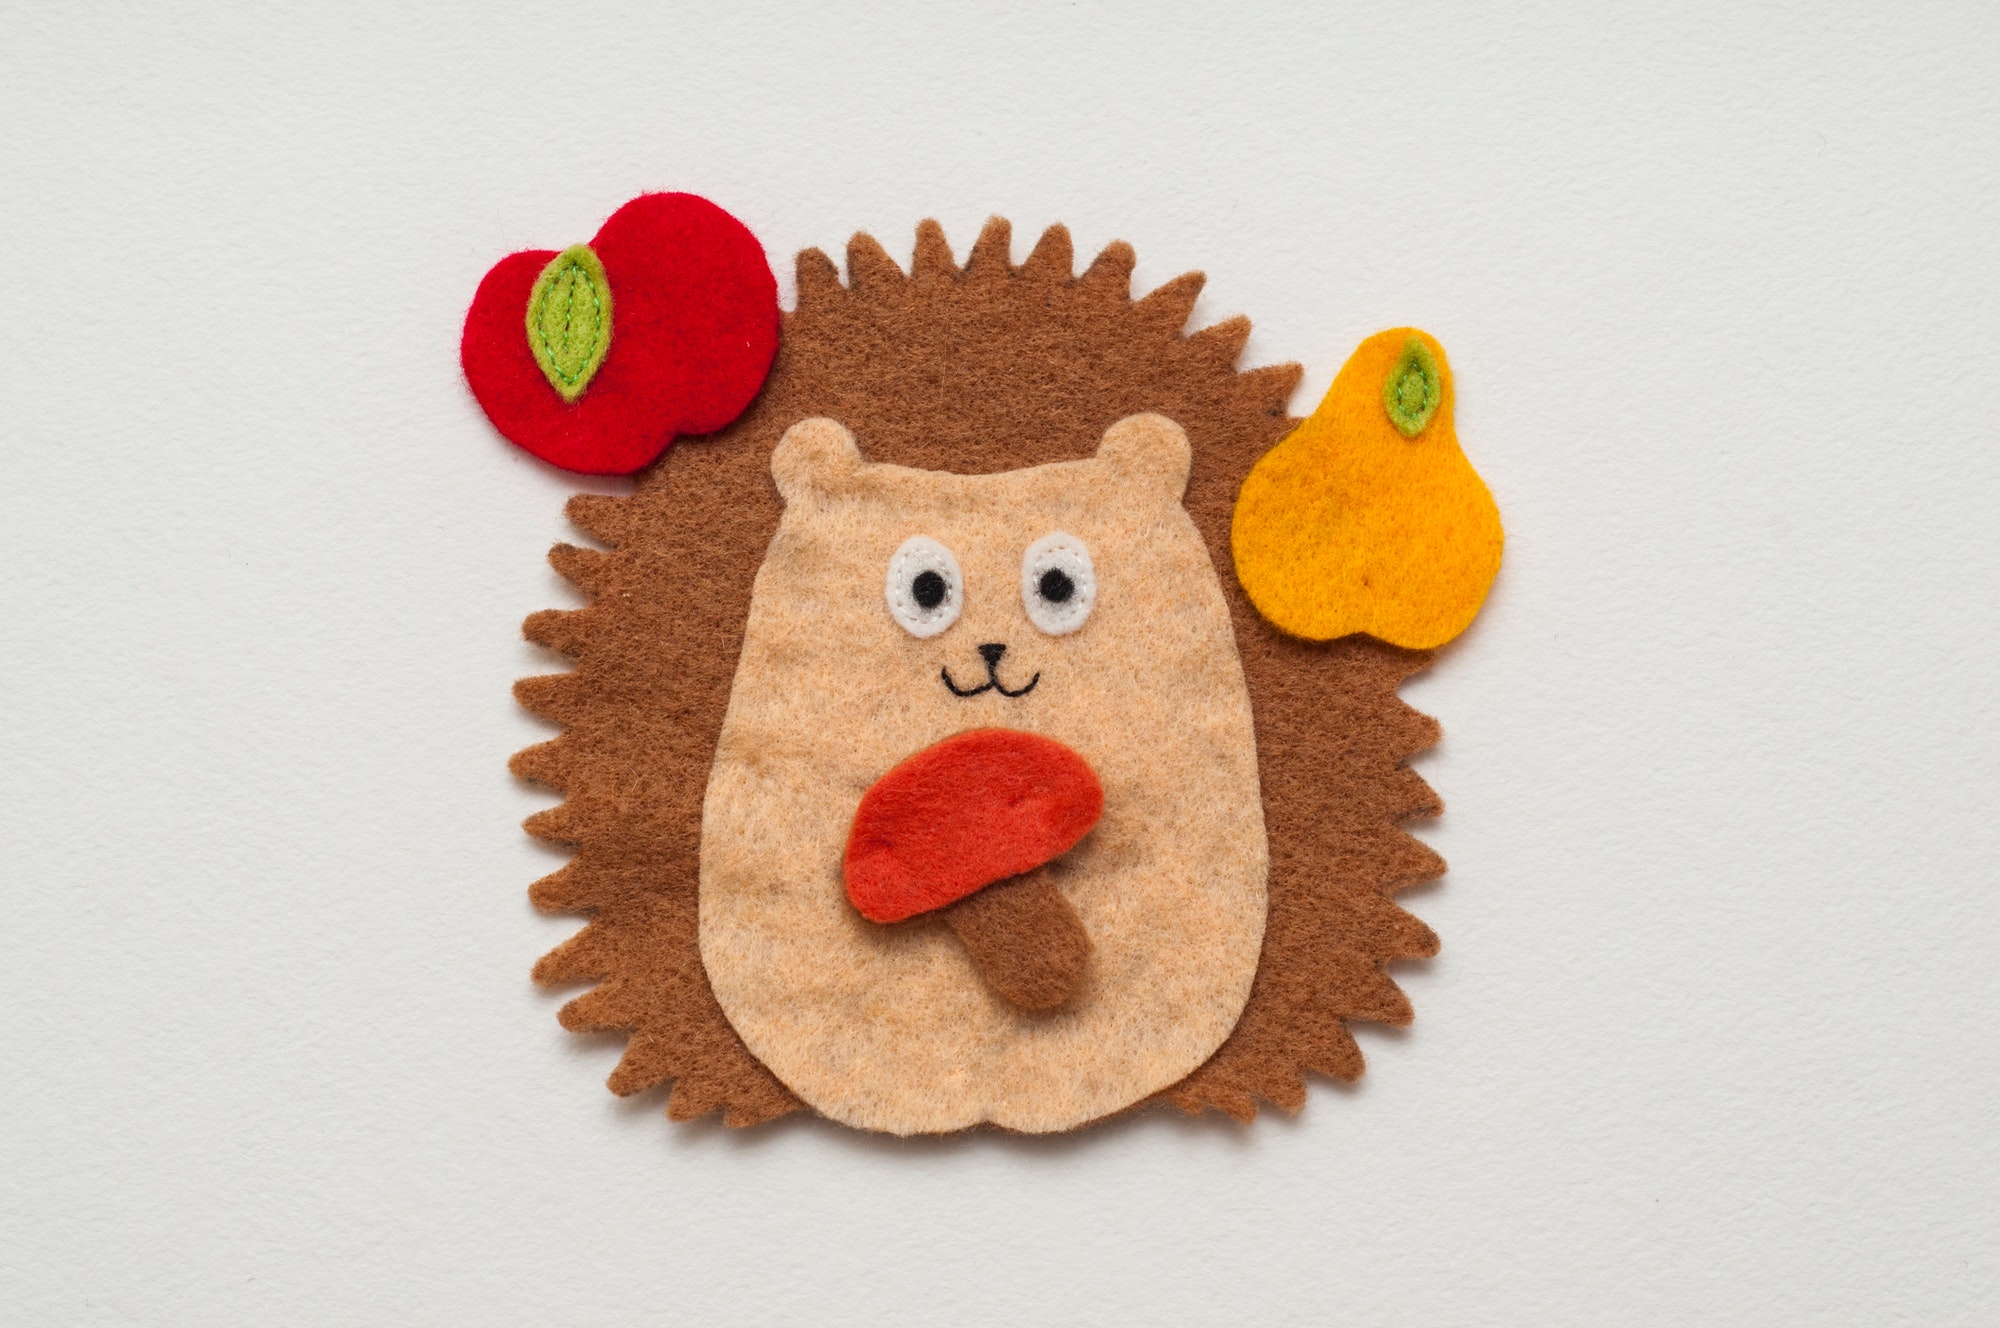 Funny felt toy. Toy hedgehog with red apple, yellow pear and mushroom in paws. Handmade toy.